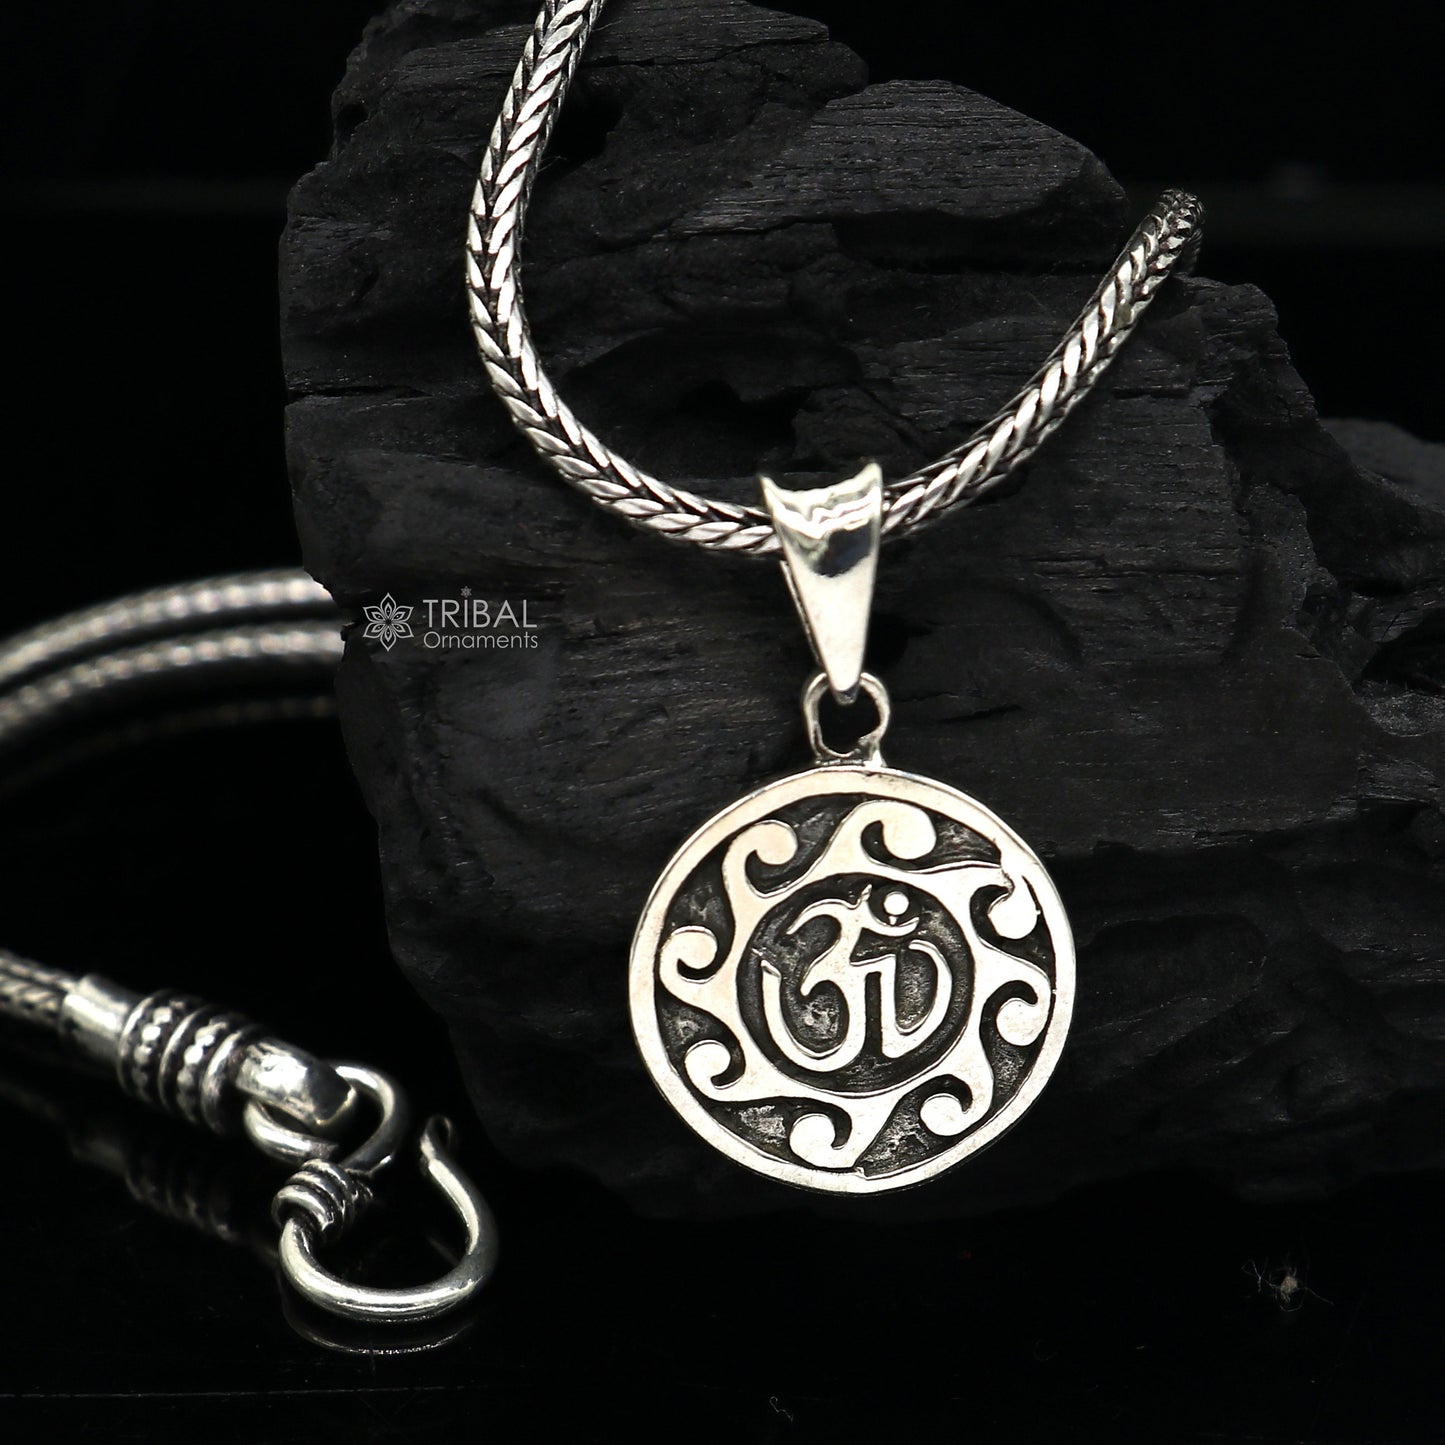 925 sterling silver handmade Divine 'Aum' OM pendant, amazing stylish good luck pendant exclusive jewelry tribal jewelry  nsp677 - TRIBAL ORNAMENTS